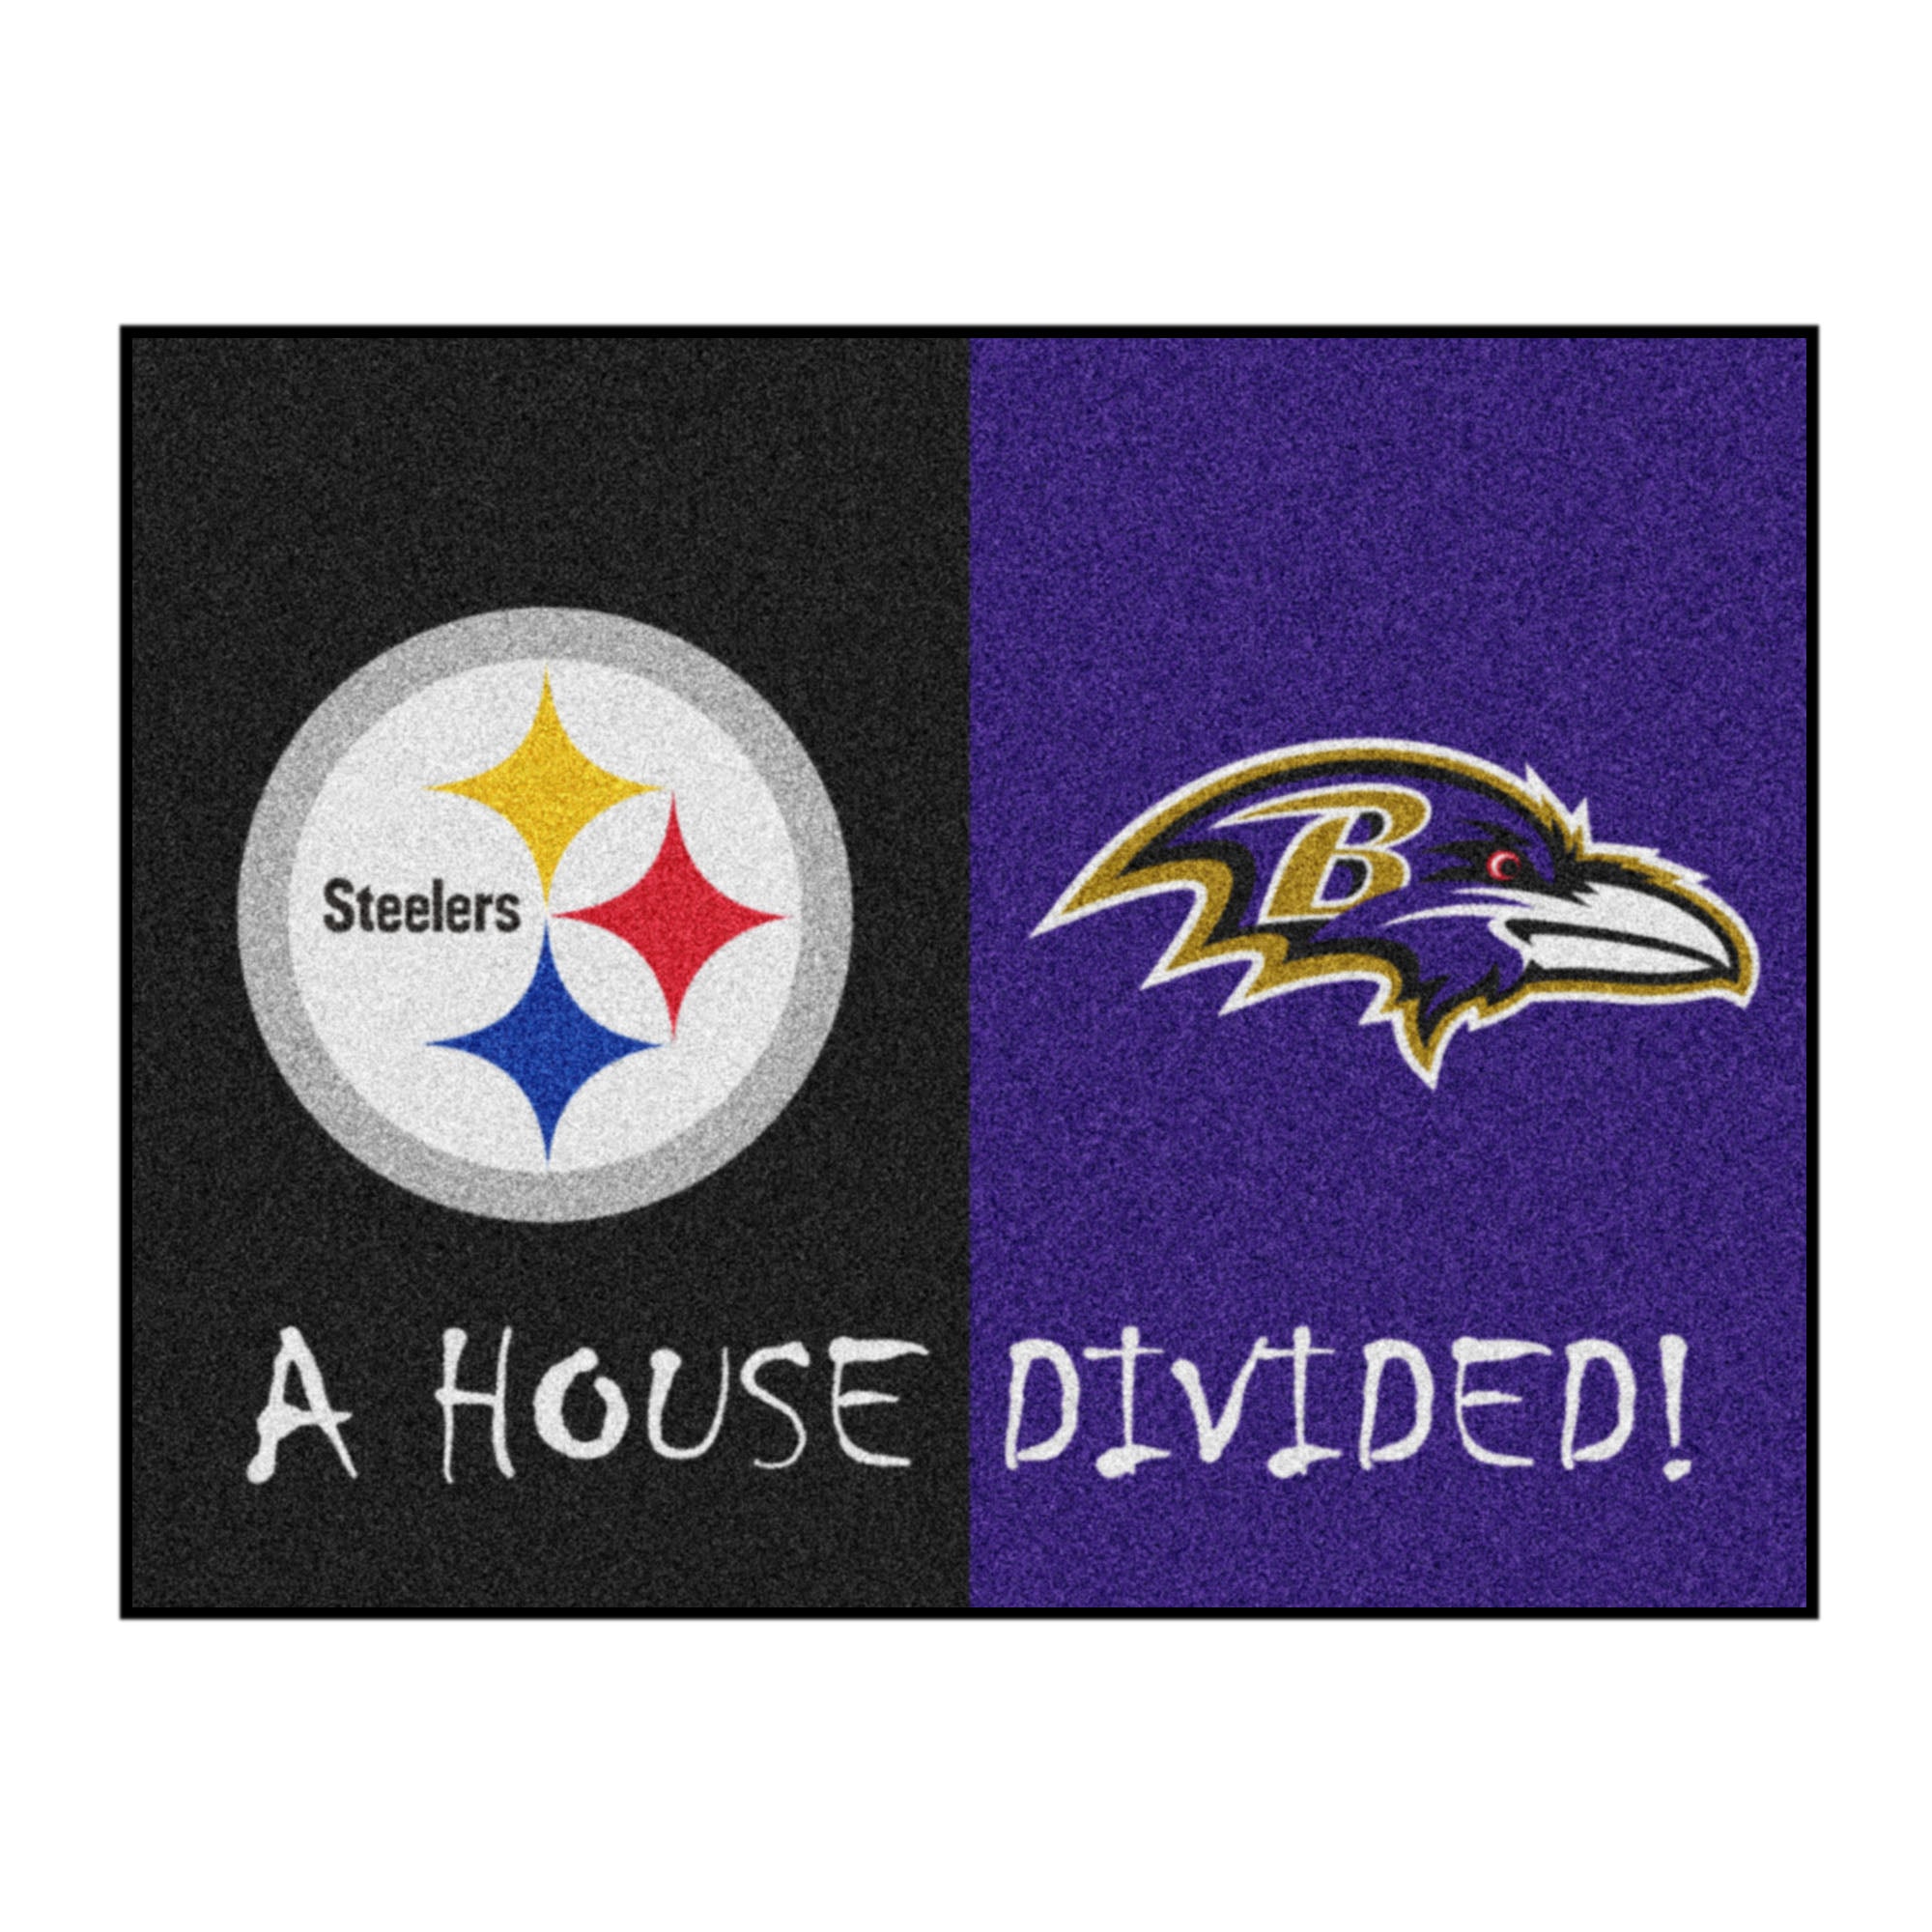 NFL House Divided - Steelers / Ravens House Divided Mat